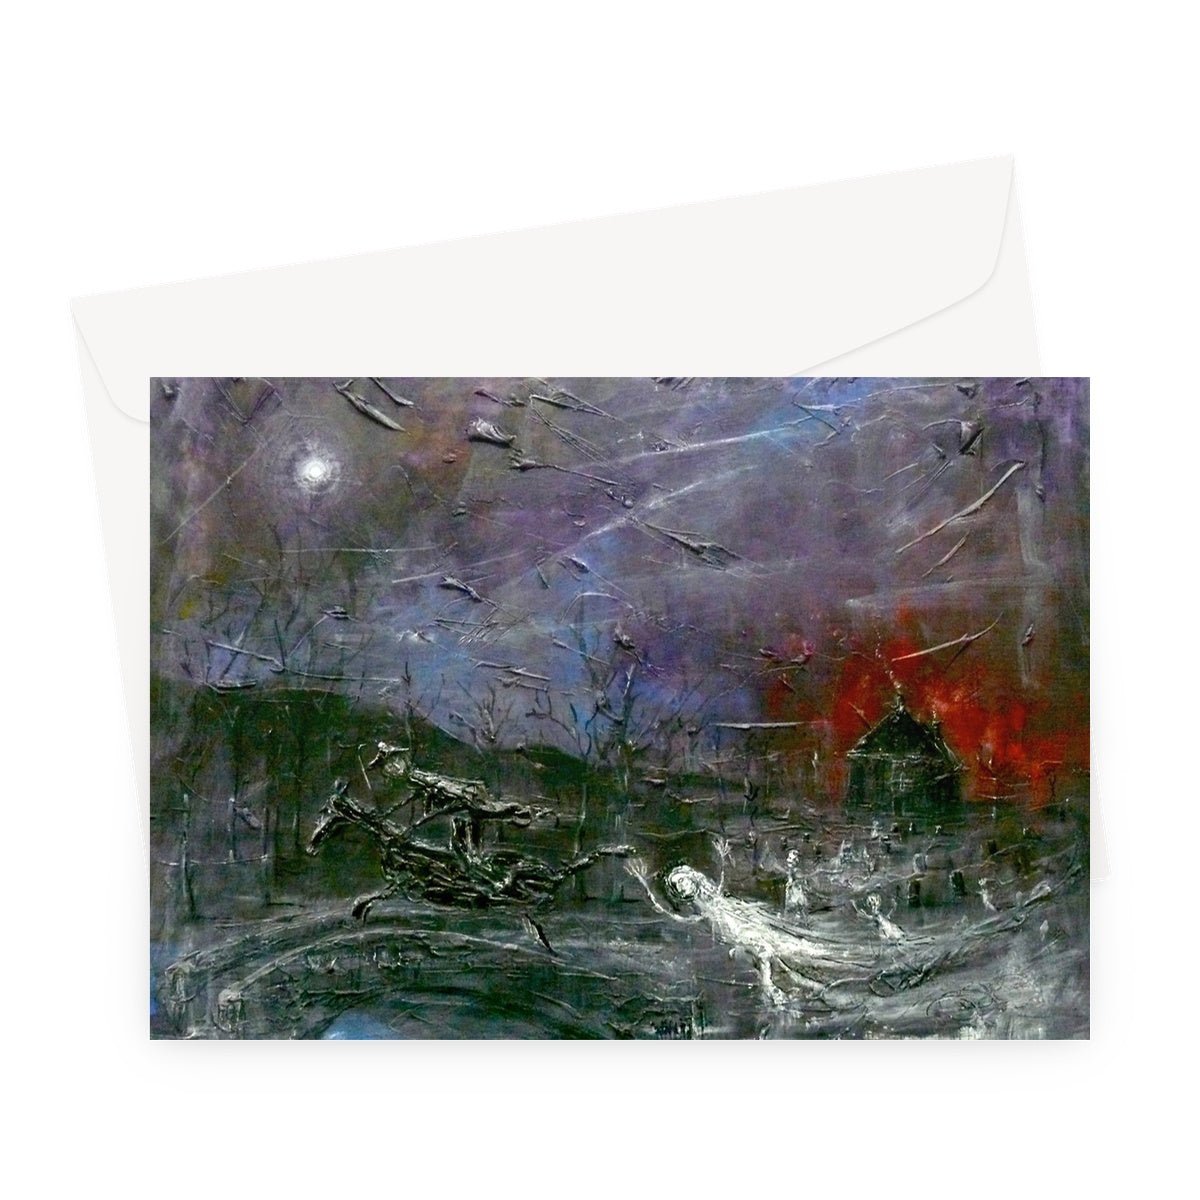 Tam O Shanter Art Gifts Greeting Card-Greetings Cards-Abstract & Impressionistic Art Gallery-A5 Landscape-10 Cards-Paintings, Prints, Homeware, Art Gifts From Scotland By Scottish Artist Kevin Hunter